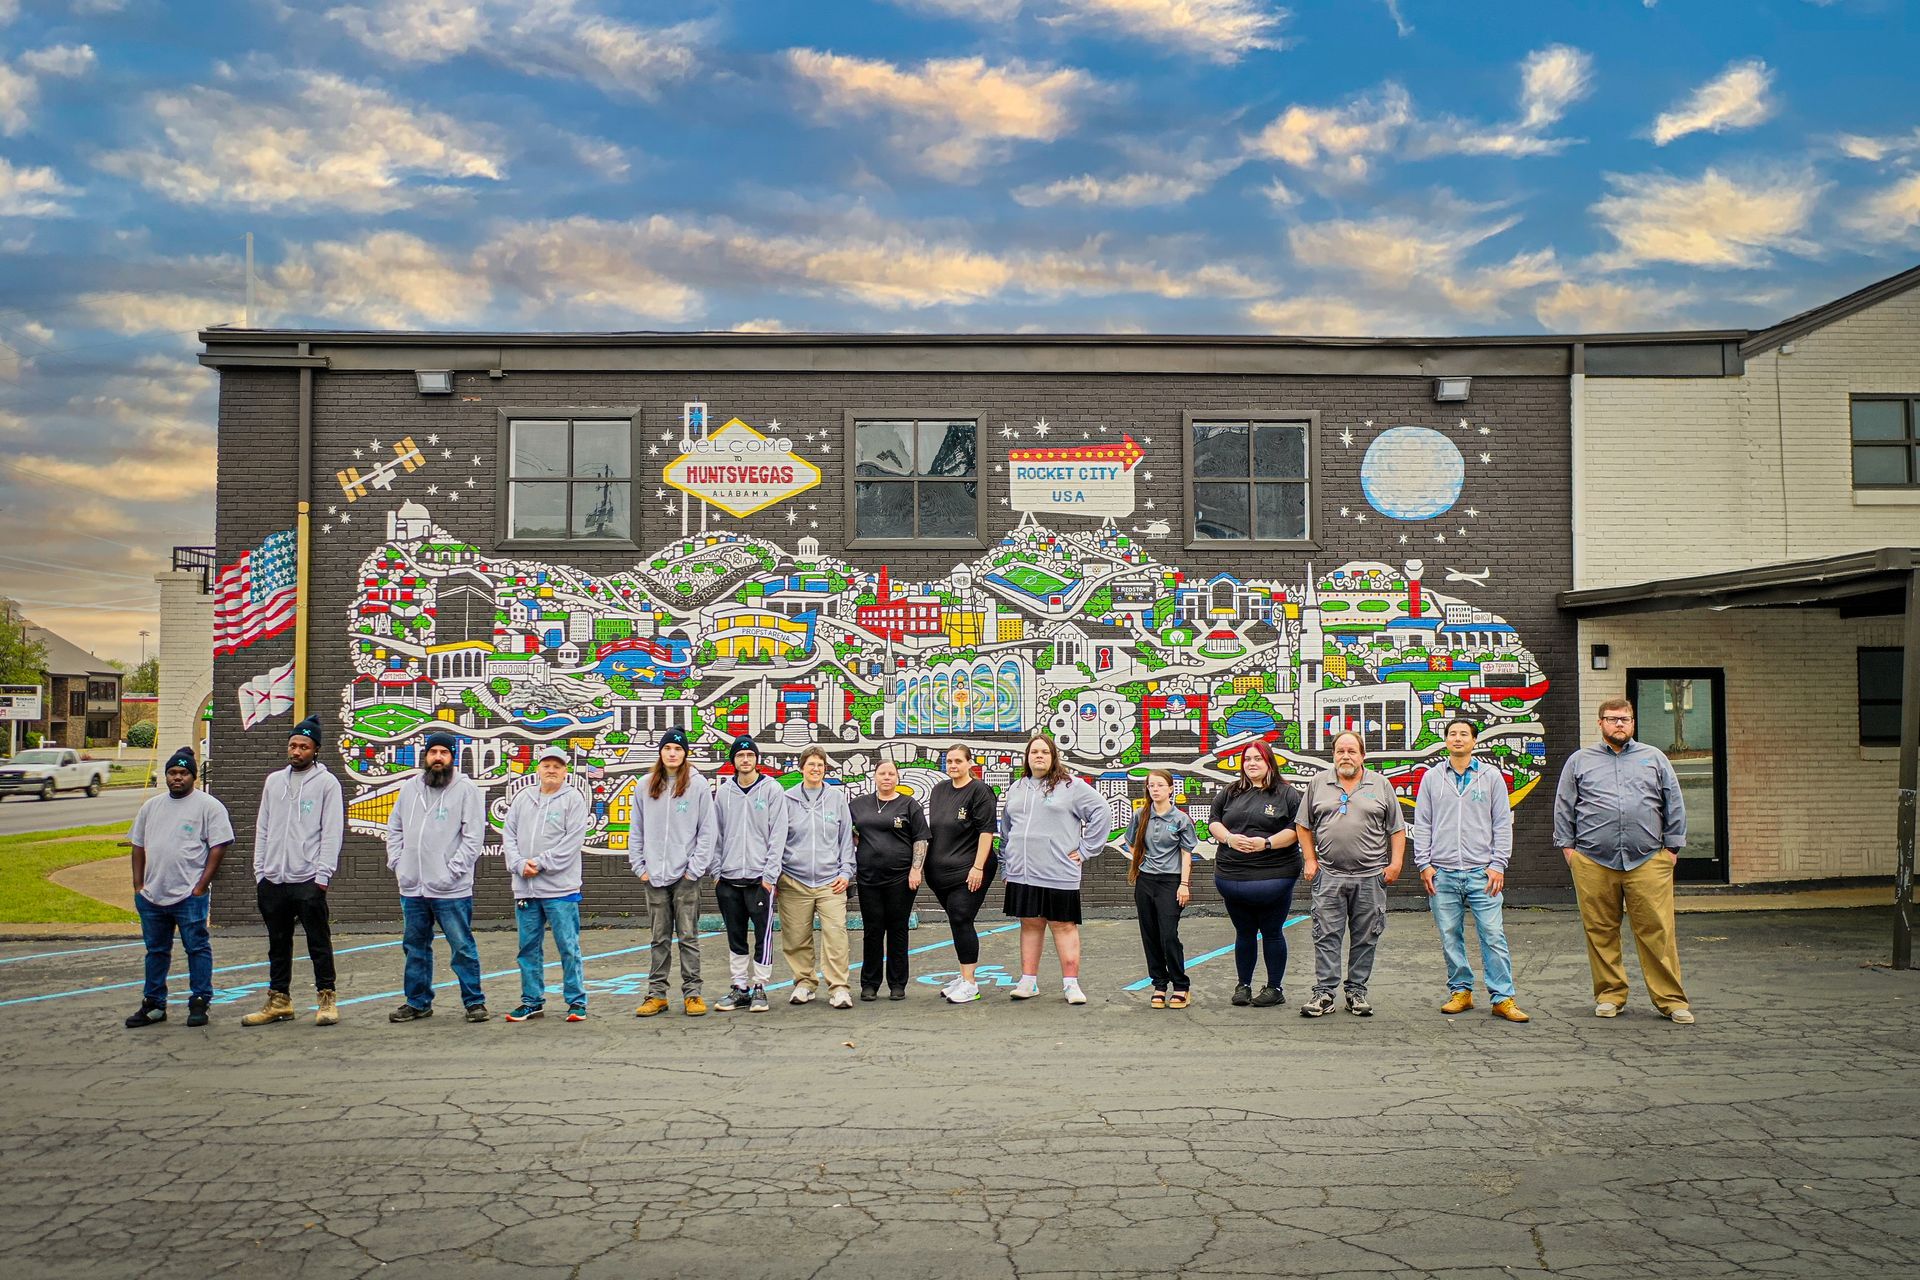 A group of people are standing in front of a large mural on the side of a building.